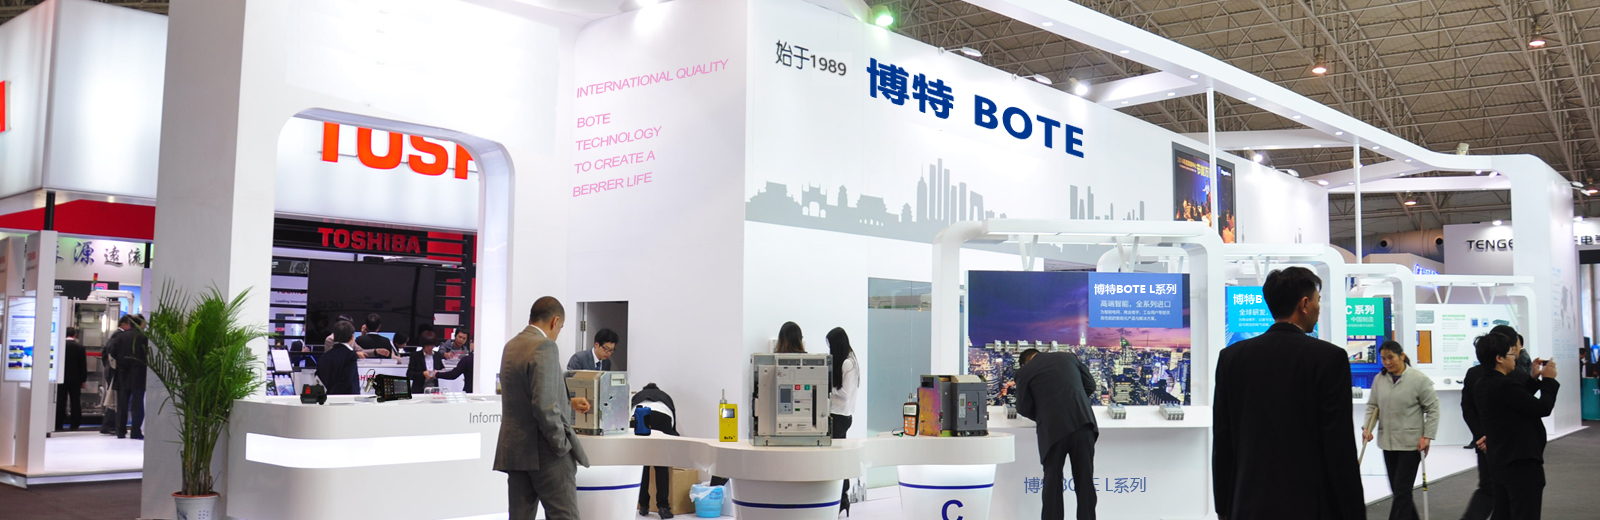 Bote(China) Instrument sales and service center